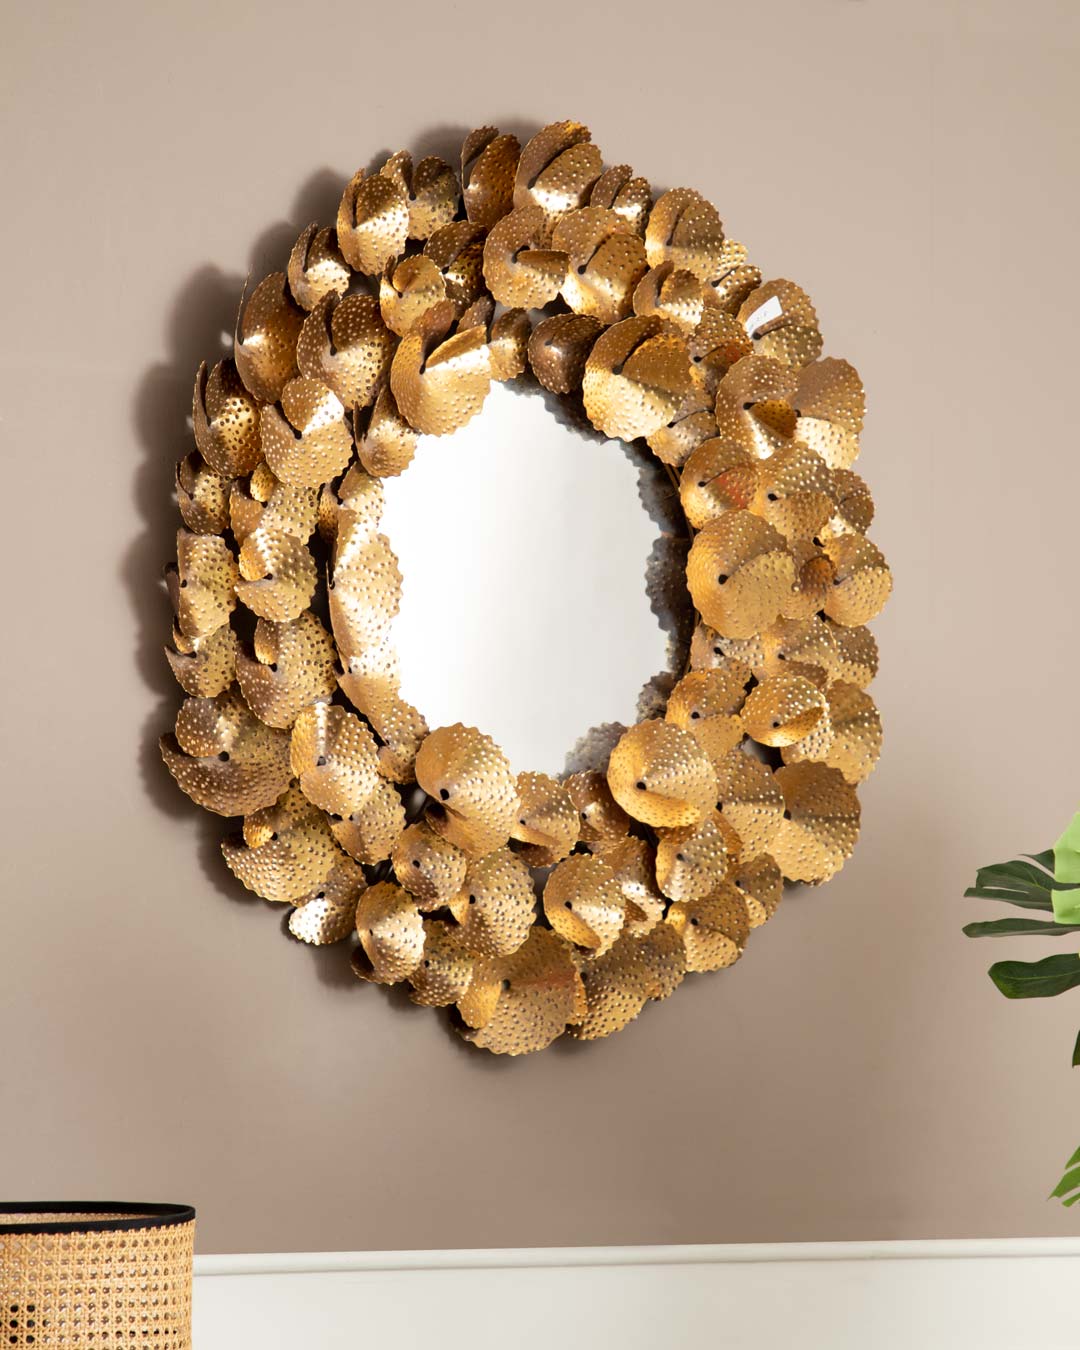 Nature's Shine Metal Leaf-Embellished Mirror hanging on wall - frontal view.